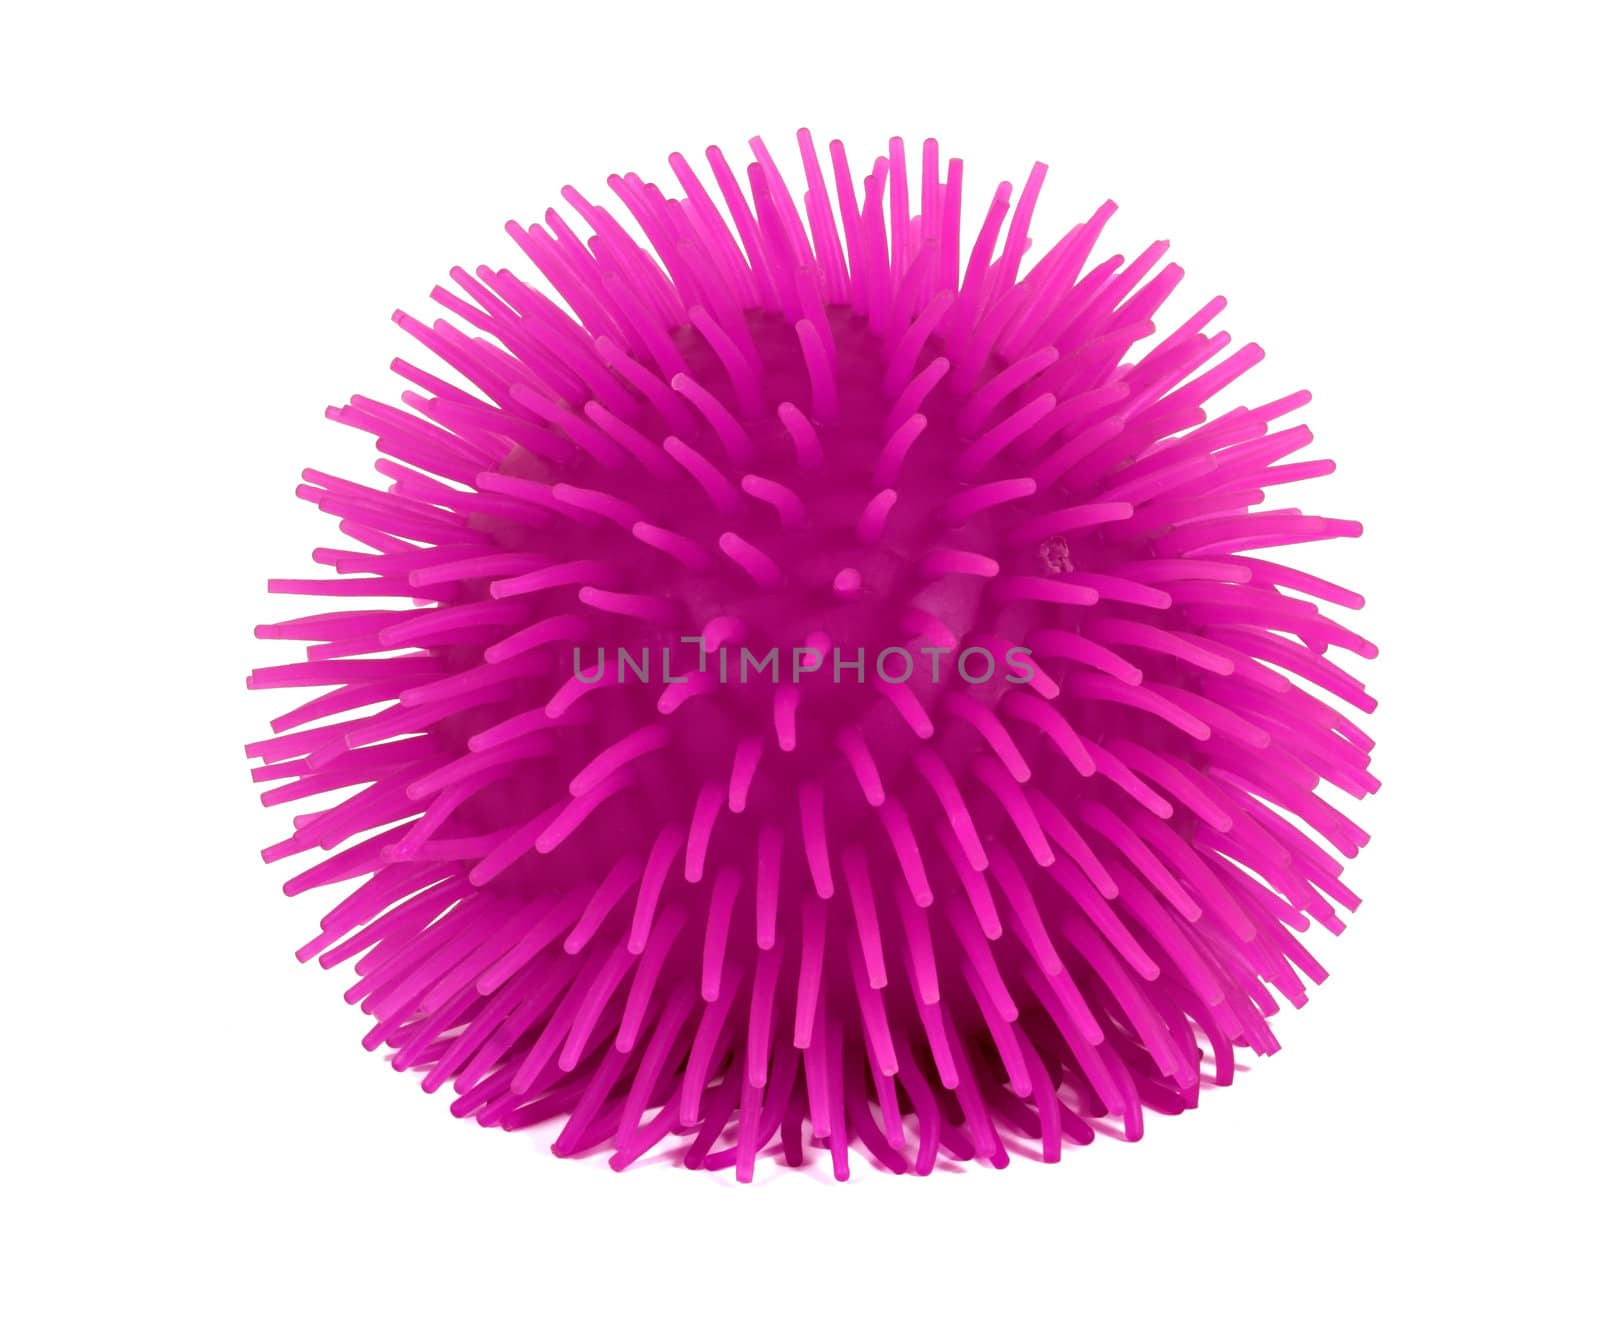 A rubber spike ball isolated over a white background